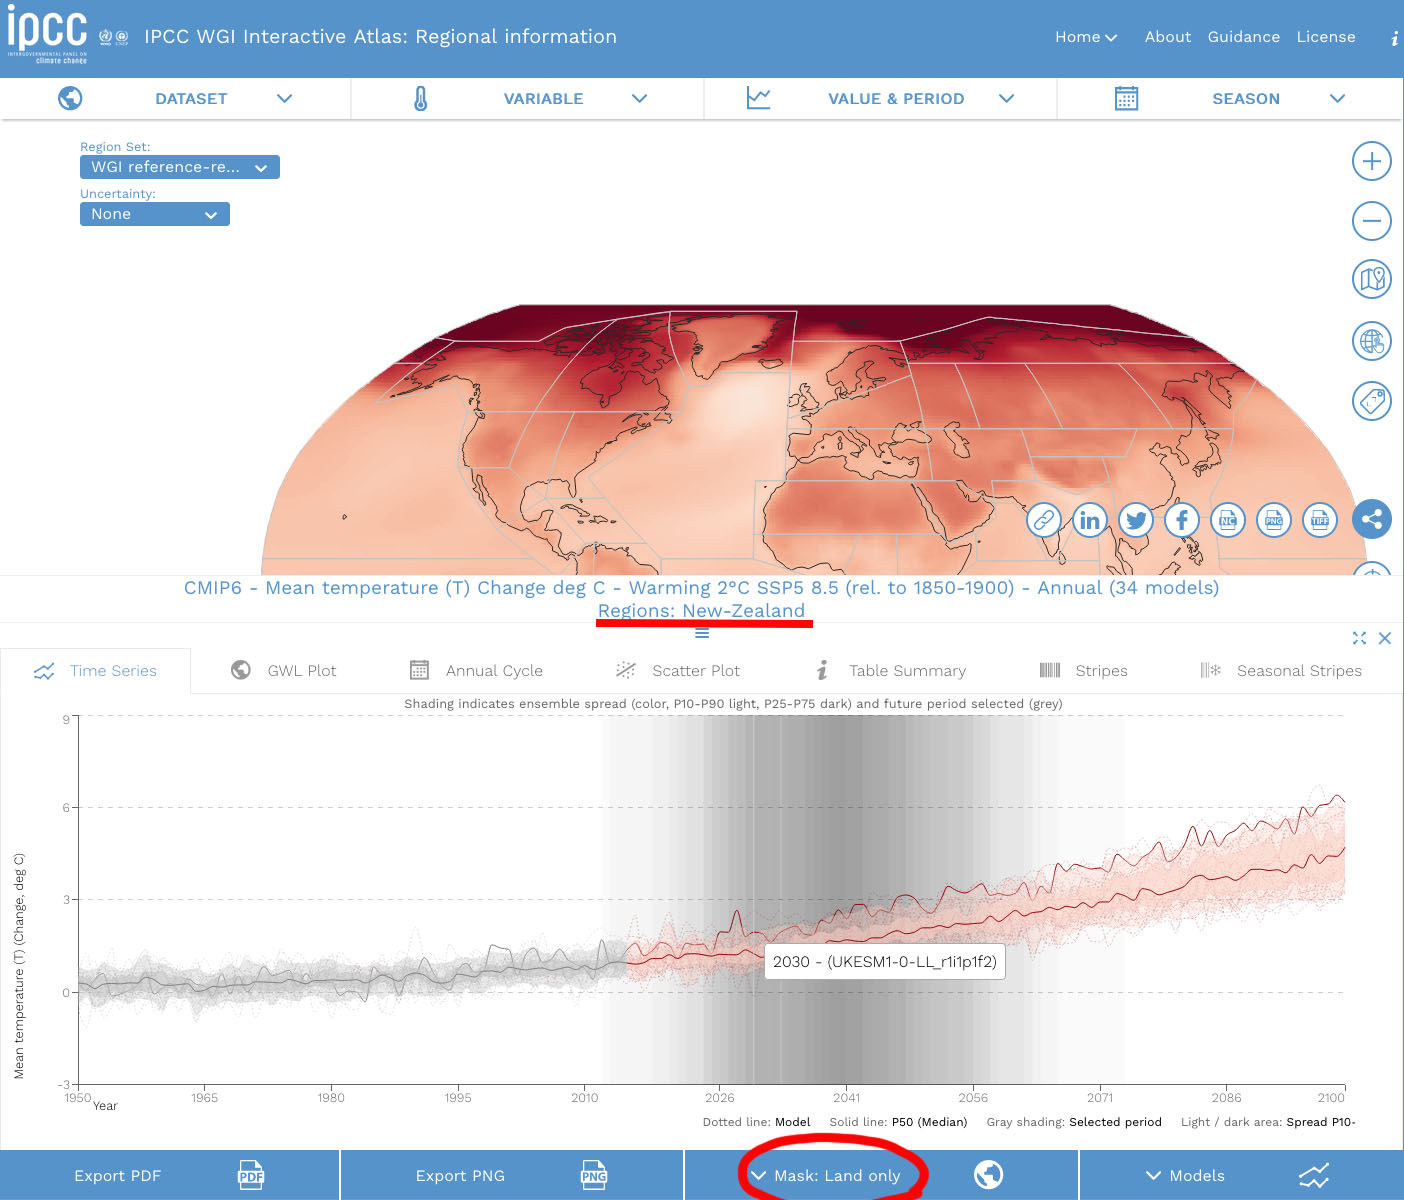 Fig. 5: To see an interactive map, click on the image. This will take you to the IPCC website. This screengrab is an example of how you can enter specific information for regions (in this example, New Zealand/ land only) and check the projected temperature changes over time, based on different models and pathways.